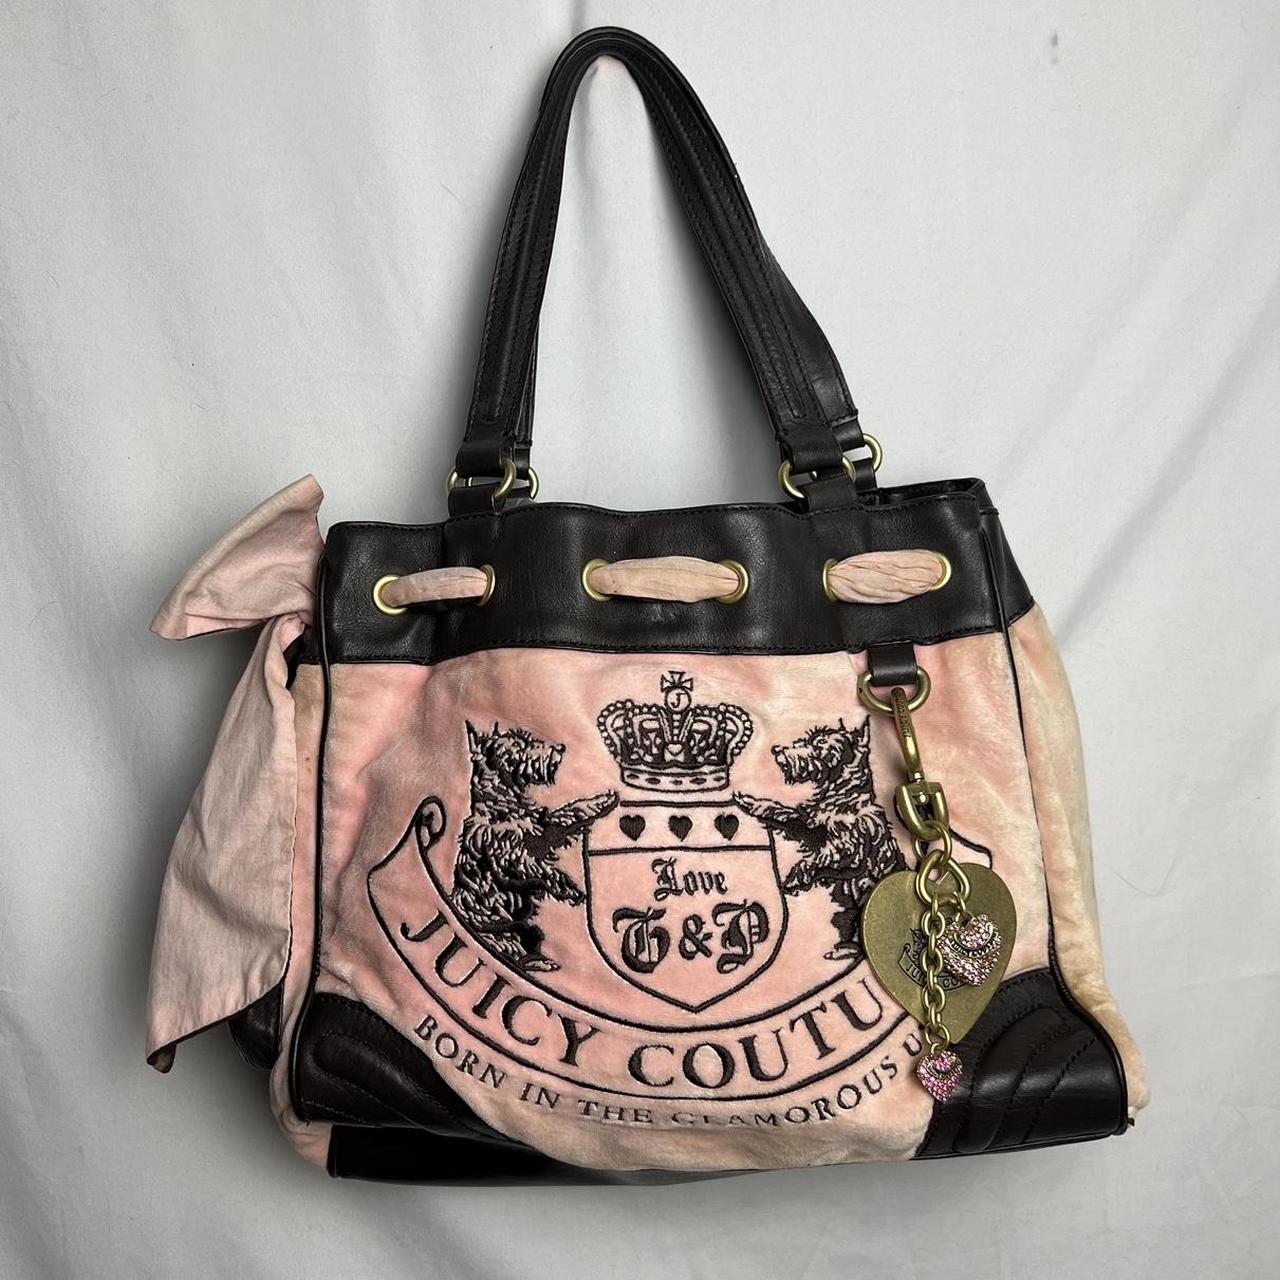 Y2K Rare Juicy Couture Pink Dreamer Bag Iconic... - Depop